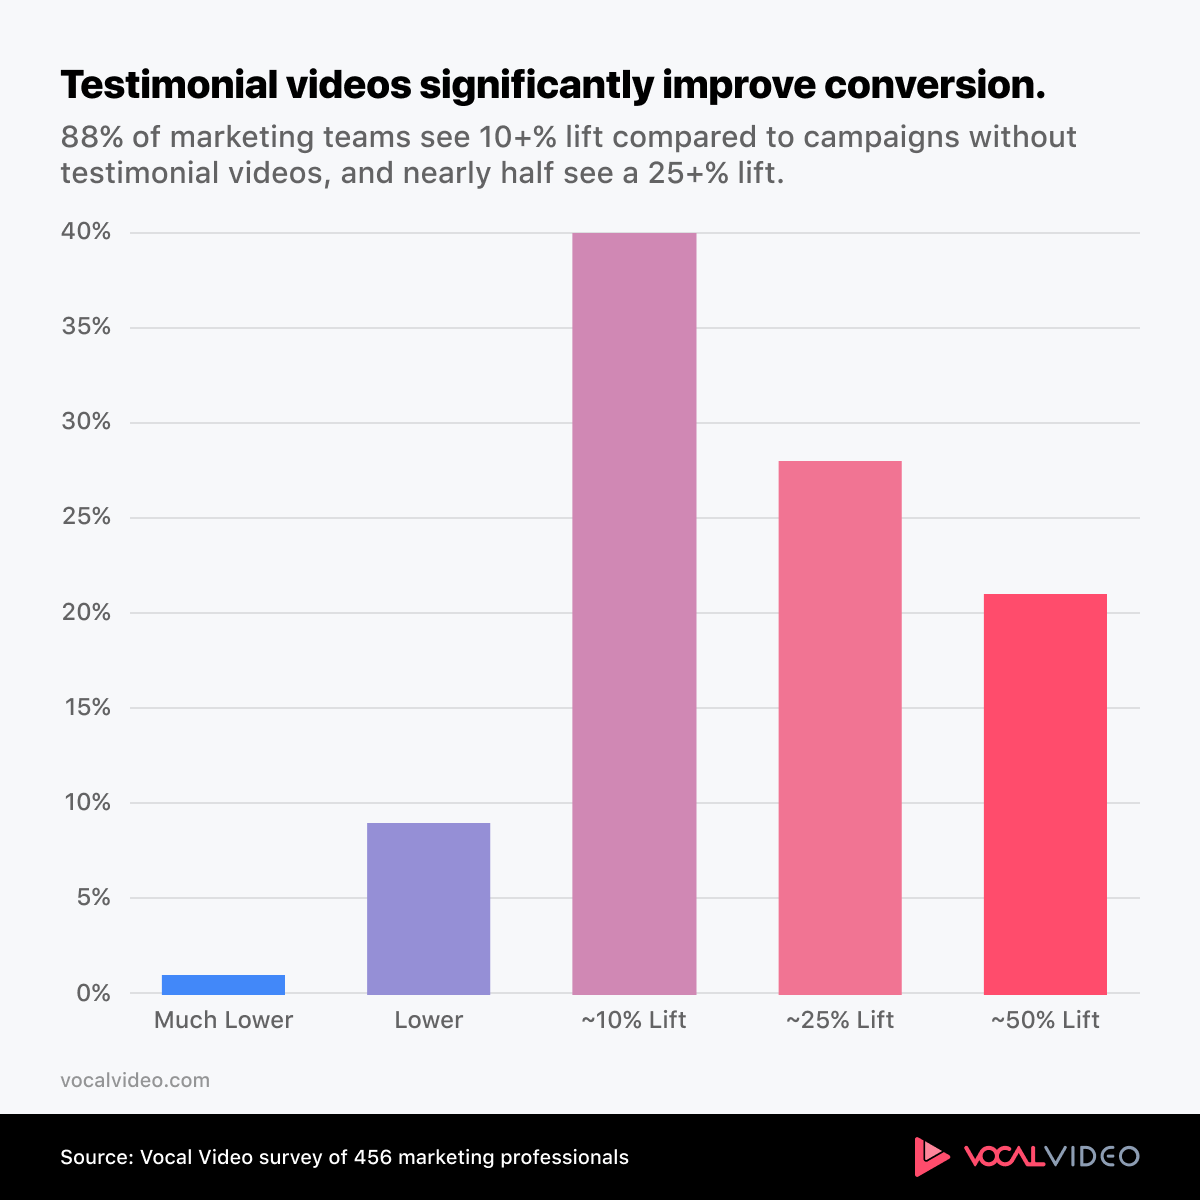 Testimonial videos significantly improve conversion.